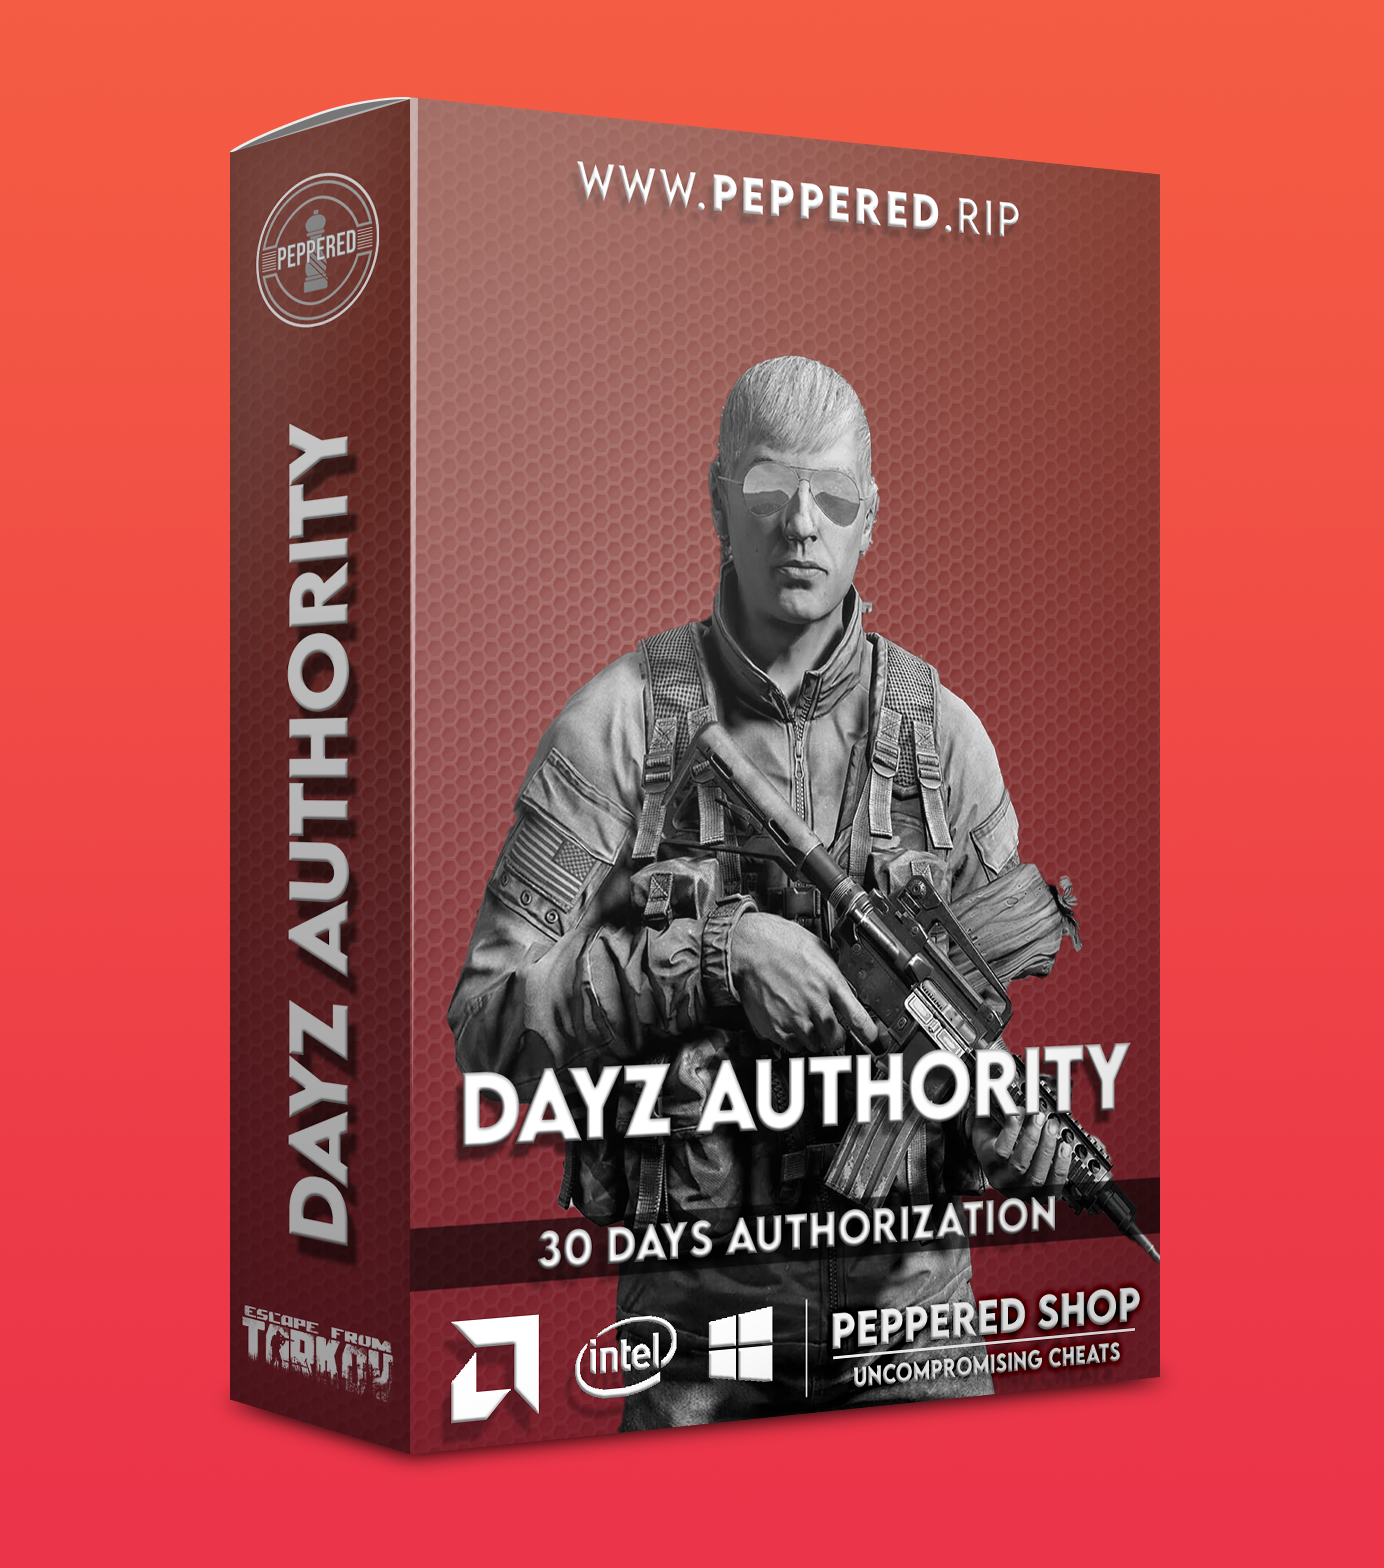 More information about "DAYZ AUTH 30 DAY"